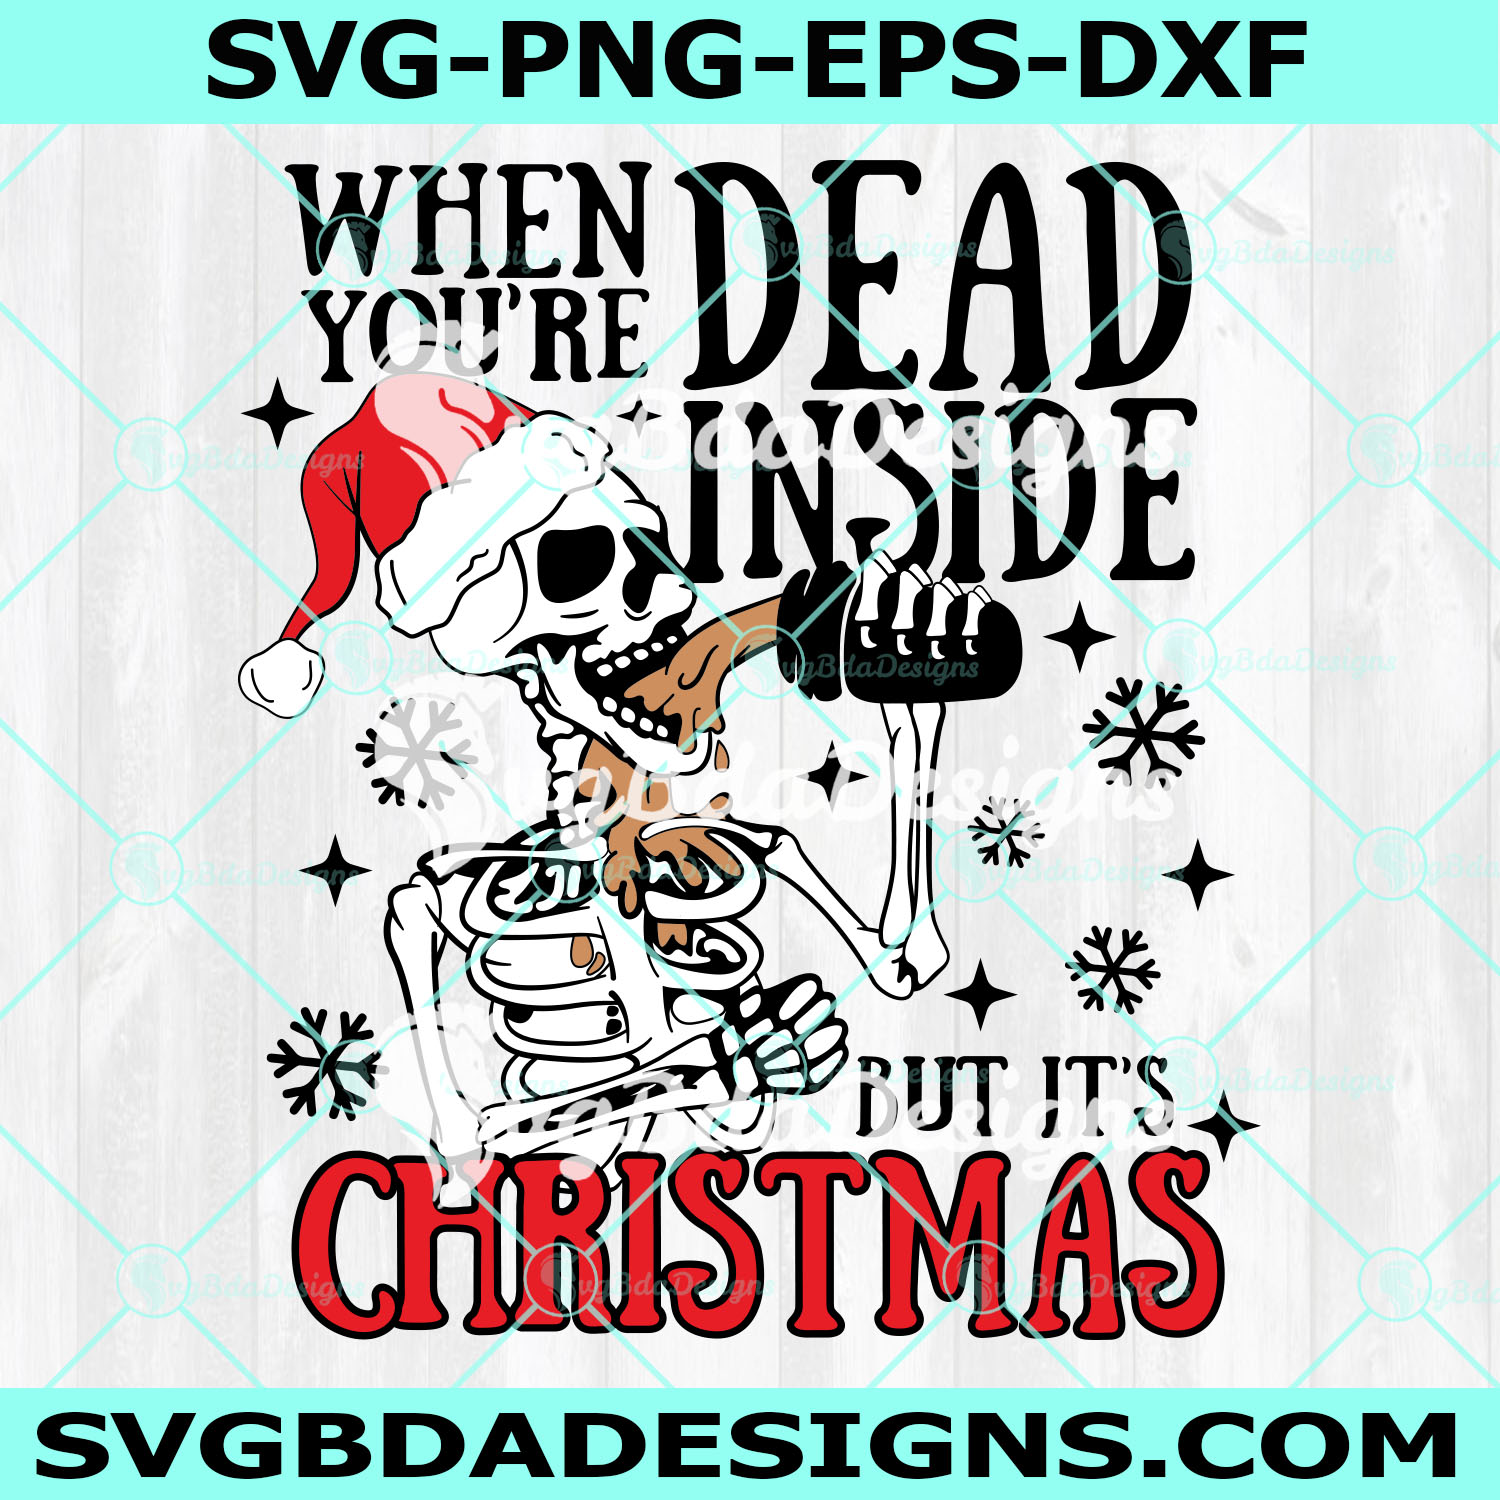 When You’re Dead Inside But It’s Christmas SVG, Skeleton Santa Hat Svg, Drink Coffee Christmas SVG, Skeleton Christmas SVG, Digital Download